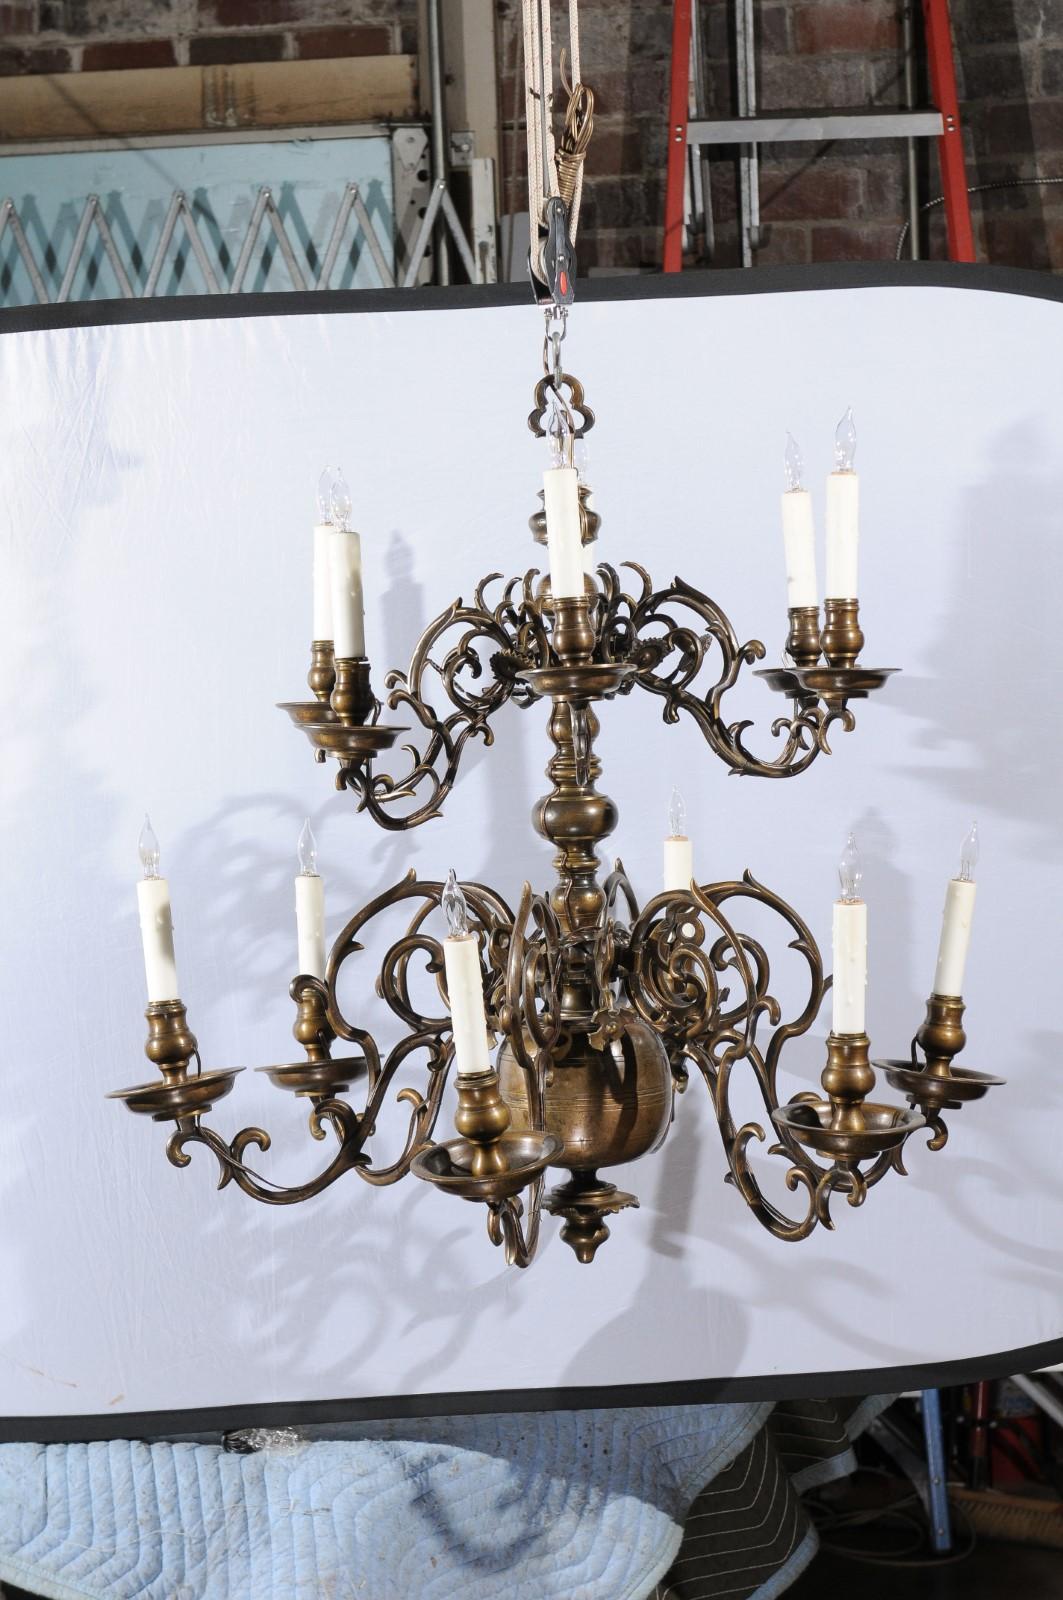 Large 2-Tier Dutch Brass Chandelier with 12 Lights, 18th Century In Good Condition For Sale In Atlanta, GA